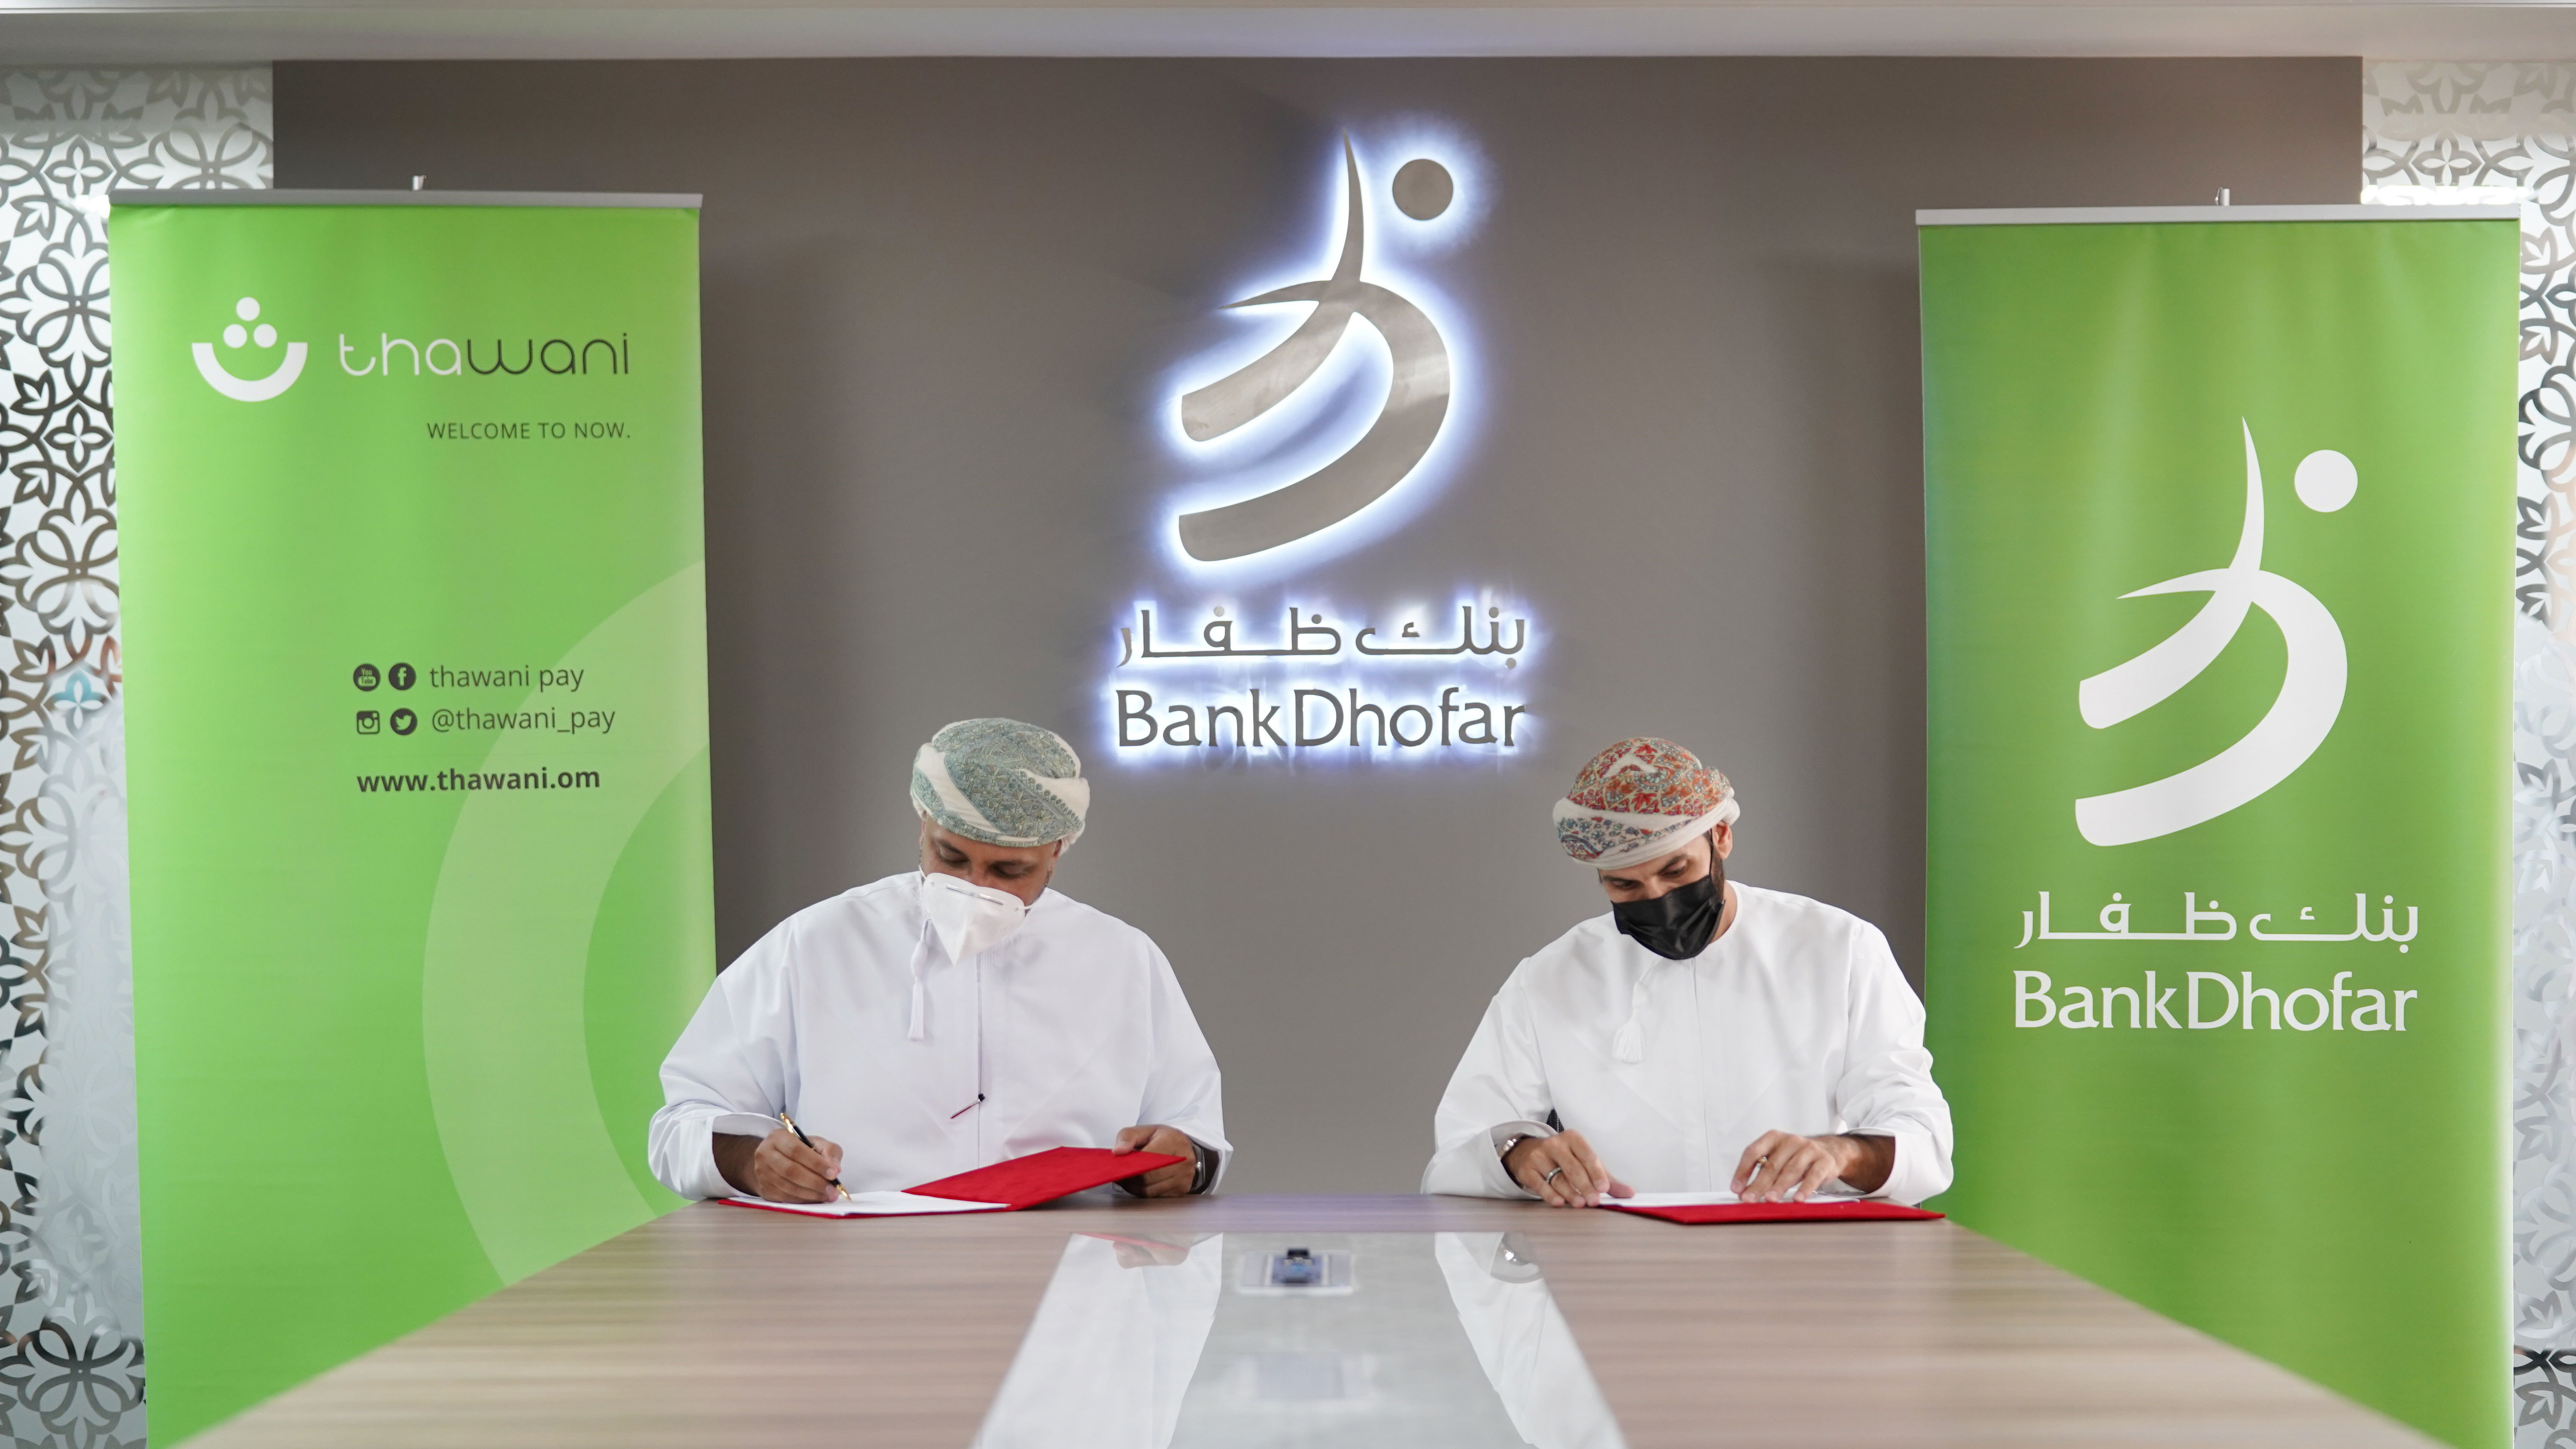 THAWANI AND BANK DHOFAR JOIN HANDS TO BOOST DIGITAL PAYMENTS SECTOR